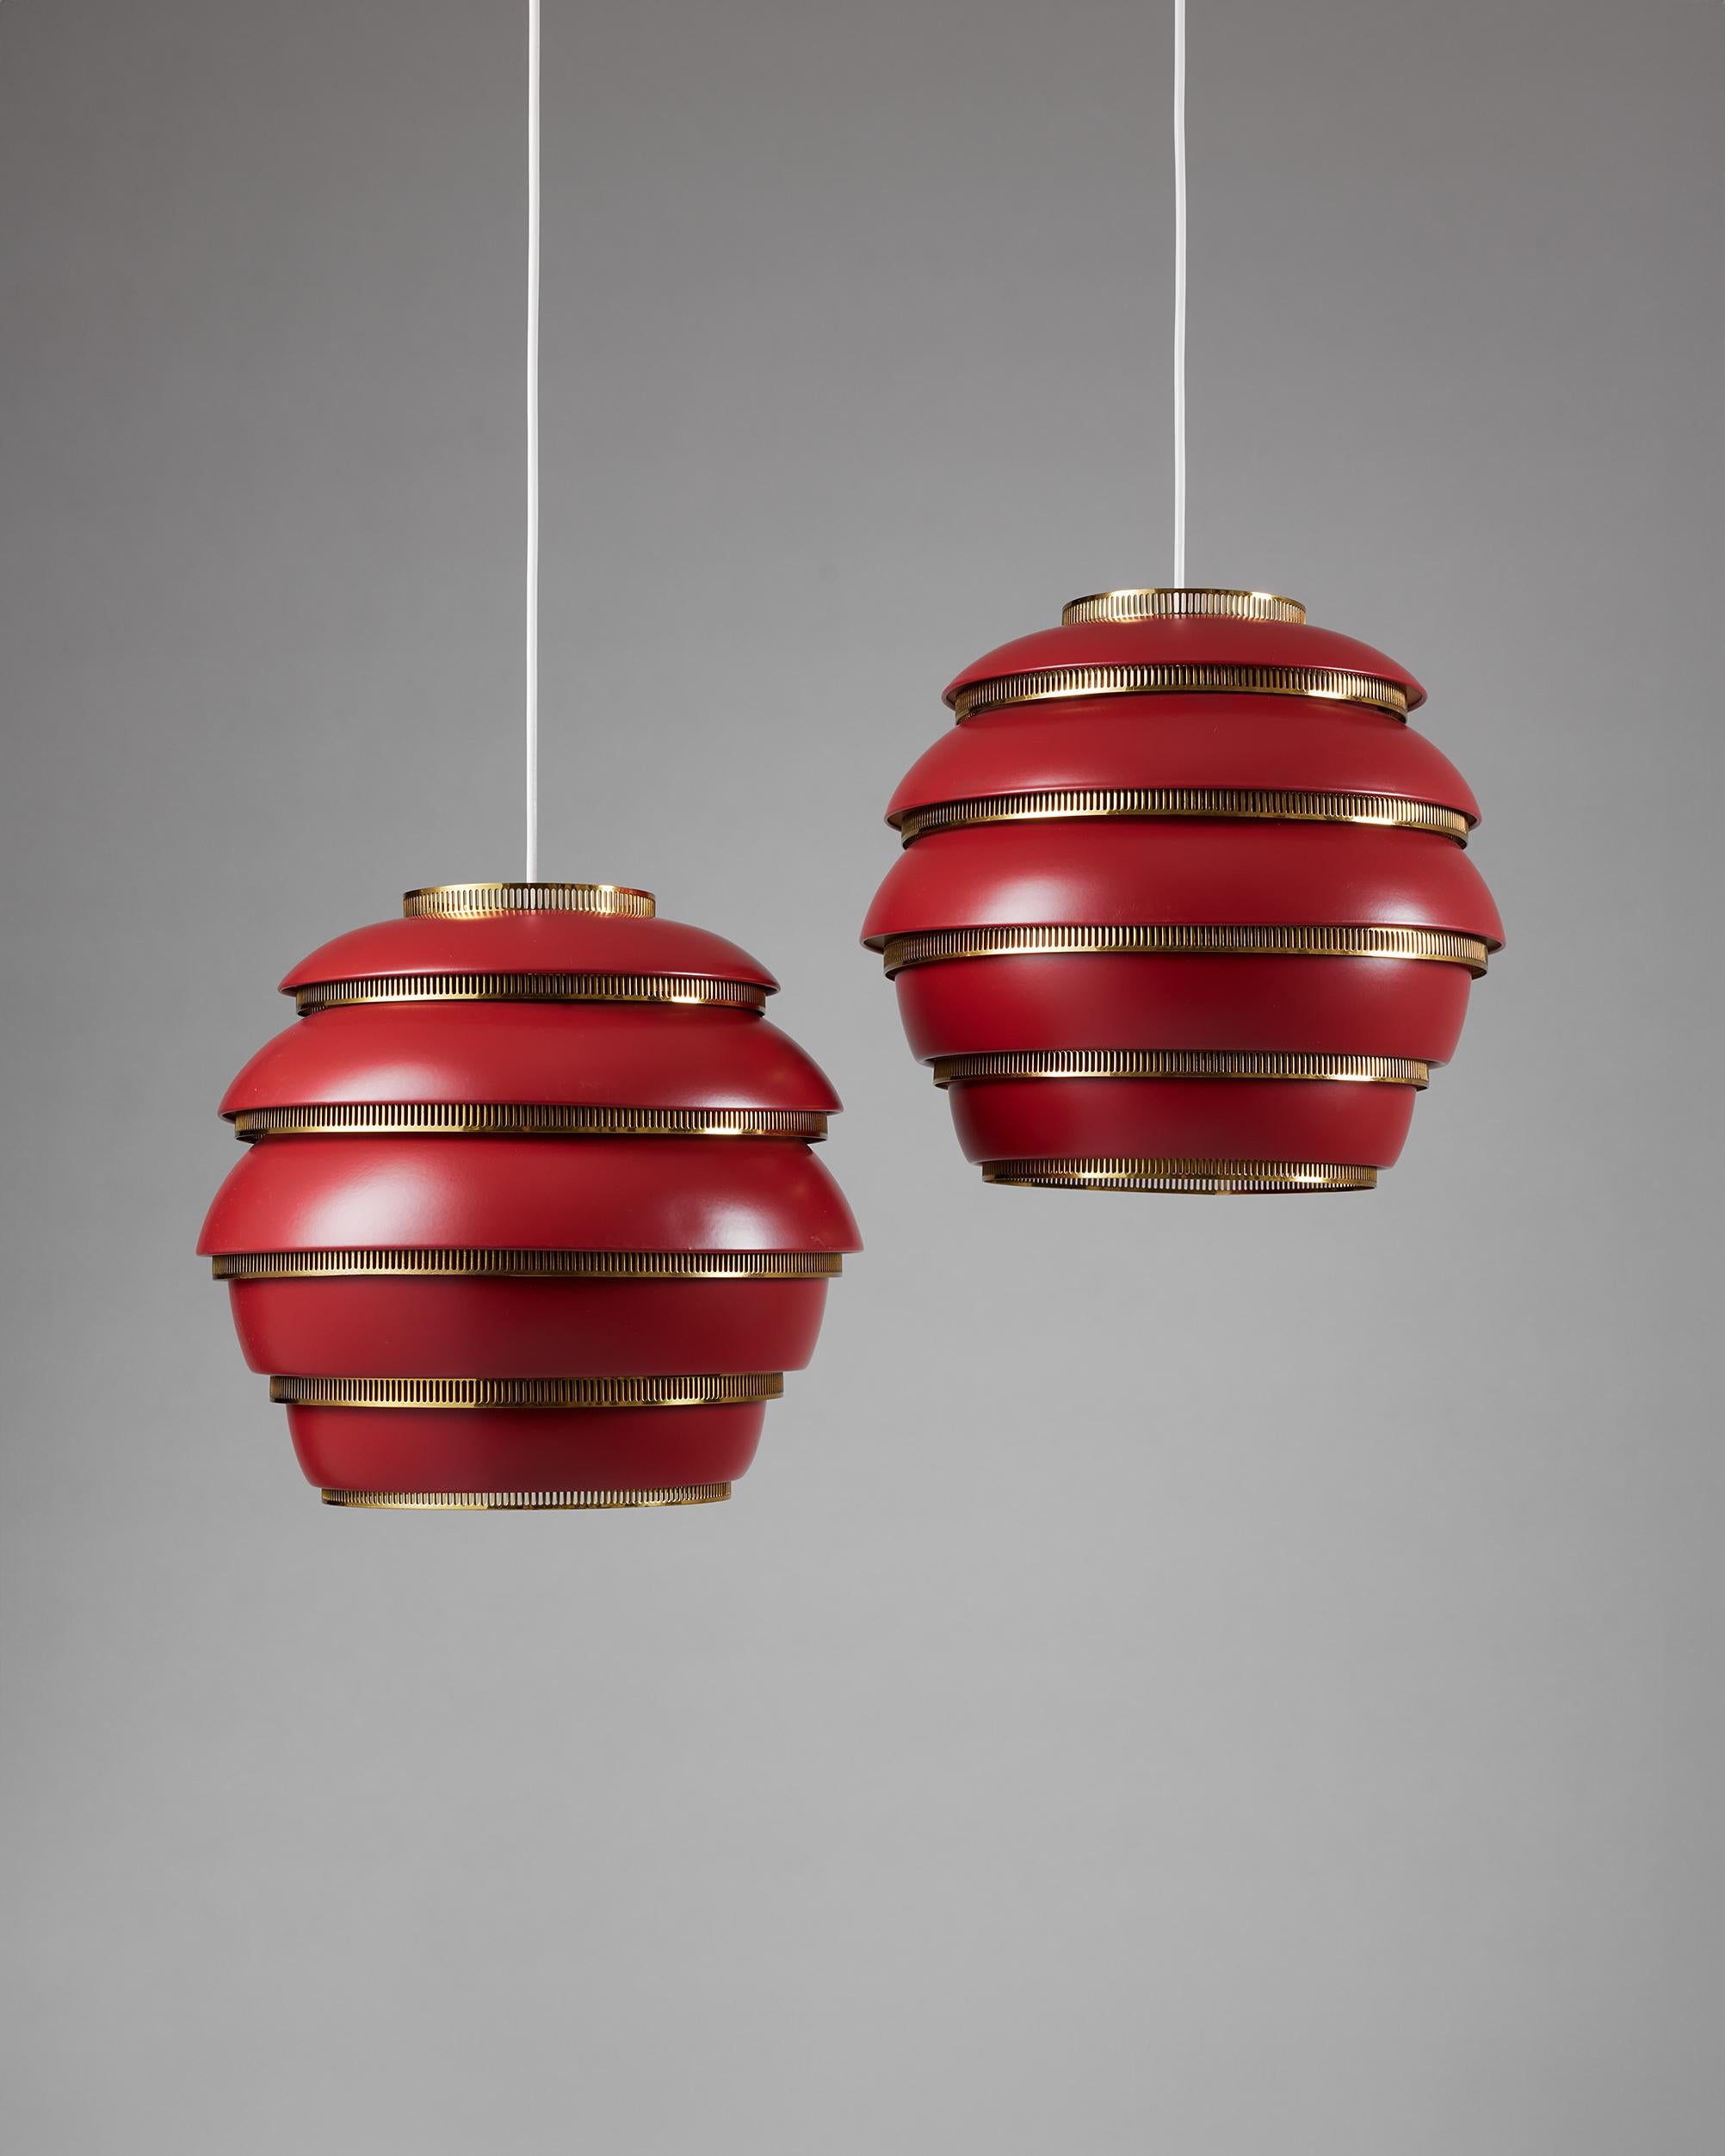 Pair of ceiling lamps ‘Beehive’ model A332 designed by Alvar Aalto for Valaistustyo,
Finland, 1952.
Painted aluminum and polished brass.

Stamped.

H: 30 cm
D: 33 cm

True to its name, the ’Beehive’ is a distinctive structure that has become one of